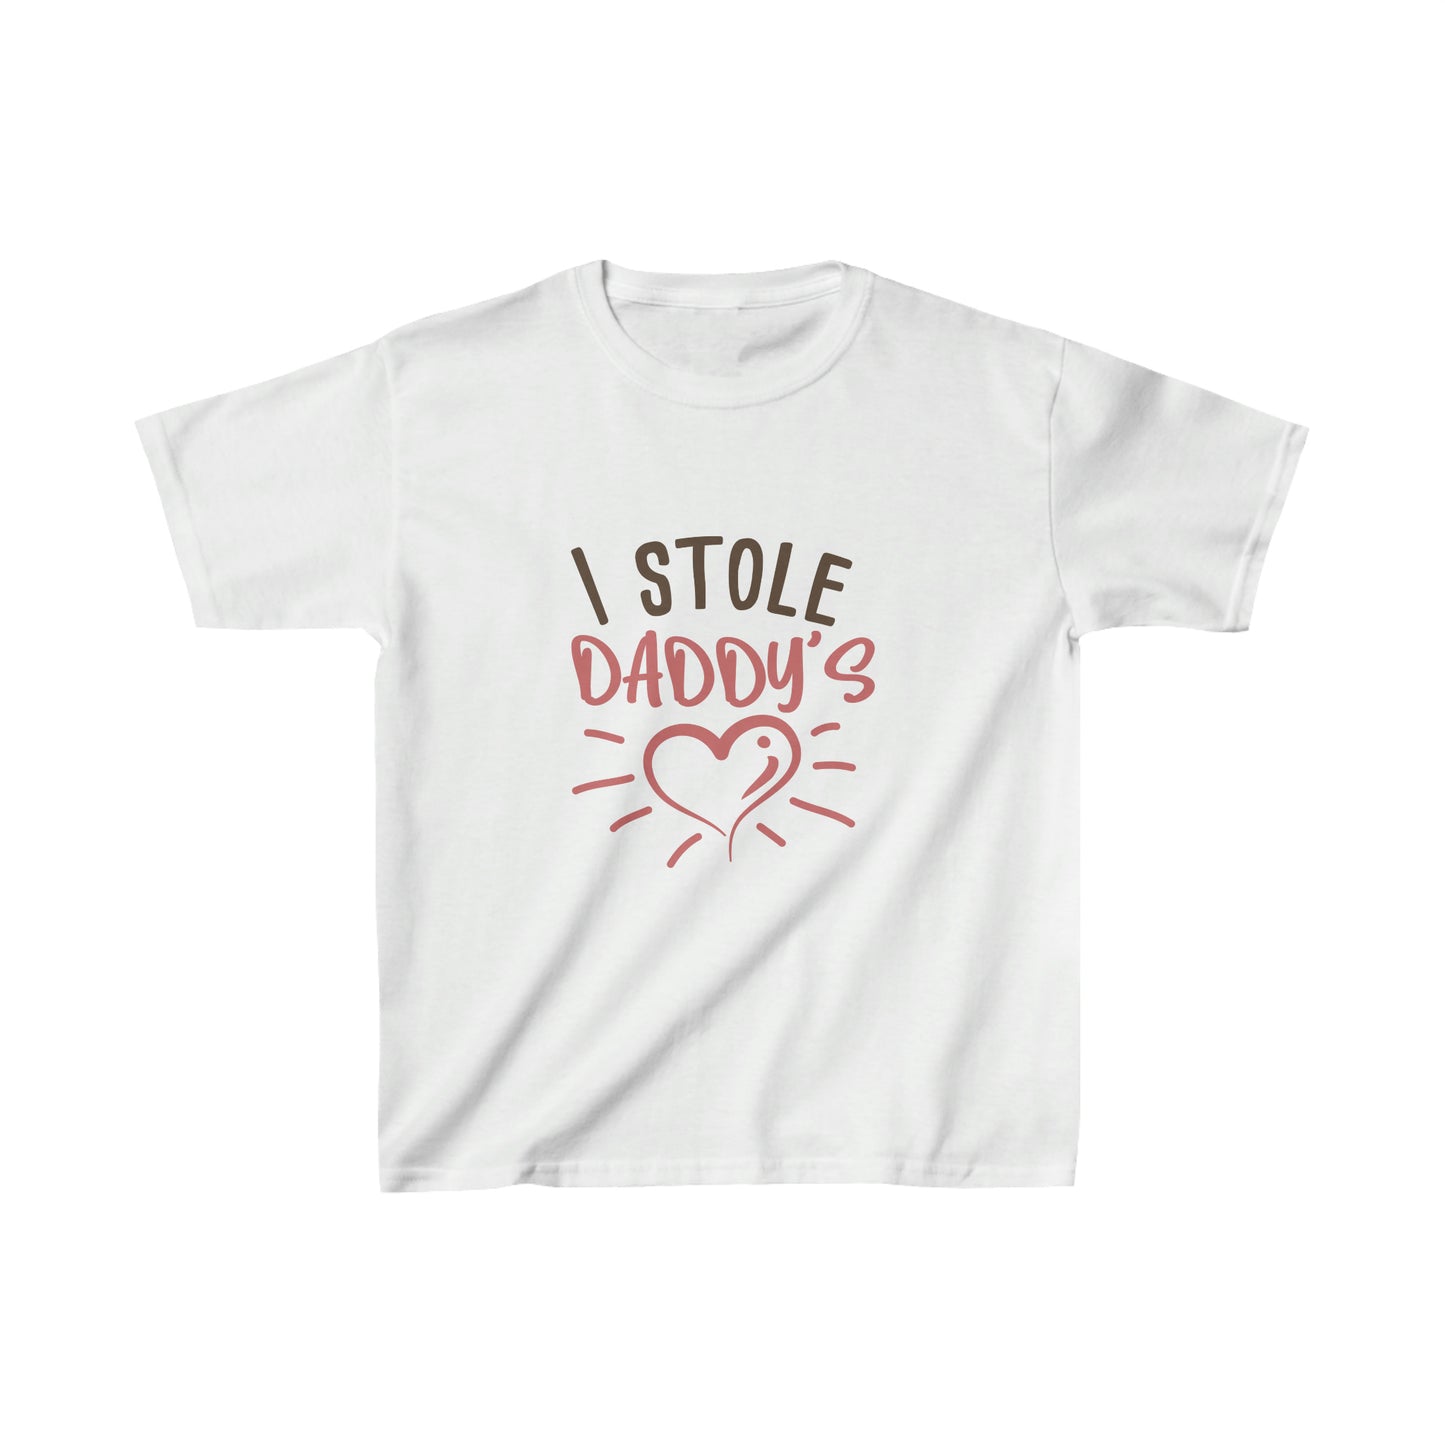 I STOLE DADDY'S HEART T-SHIRT